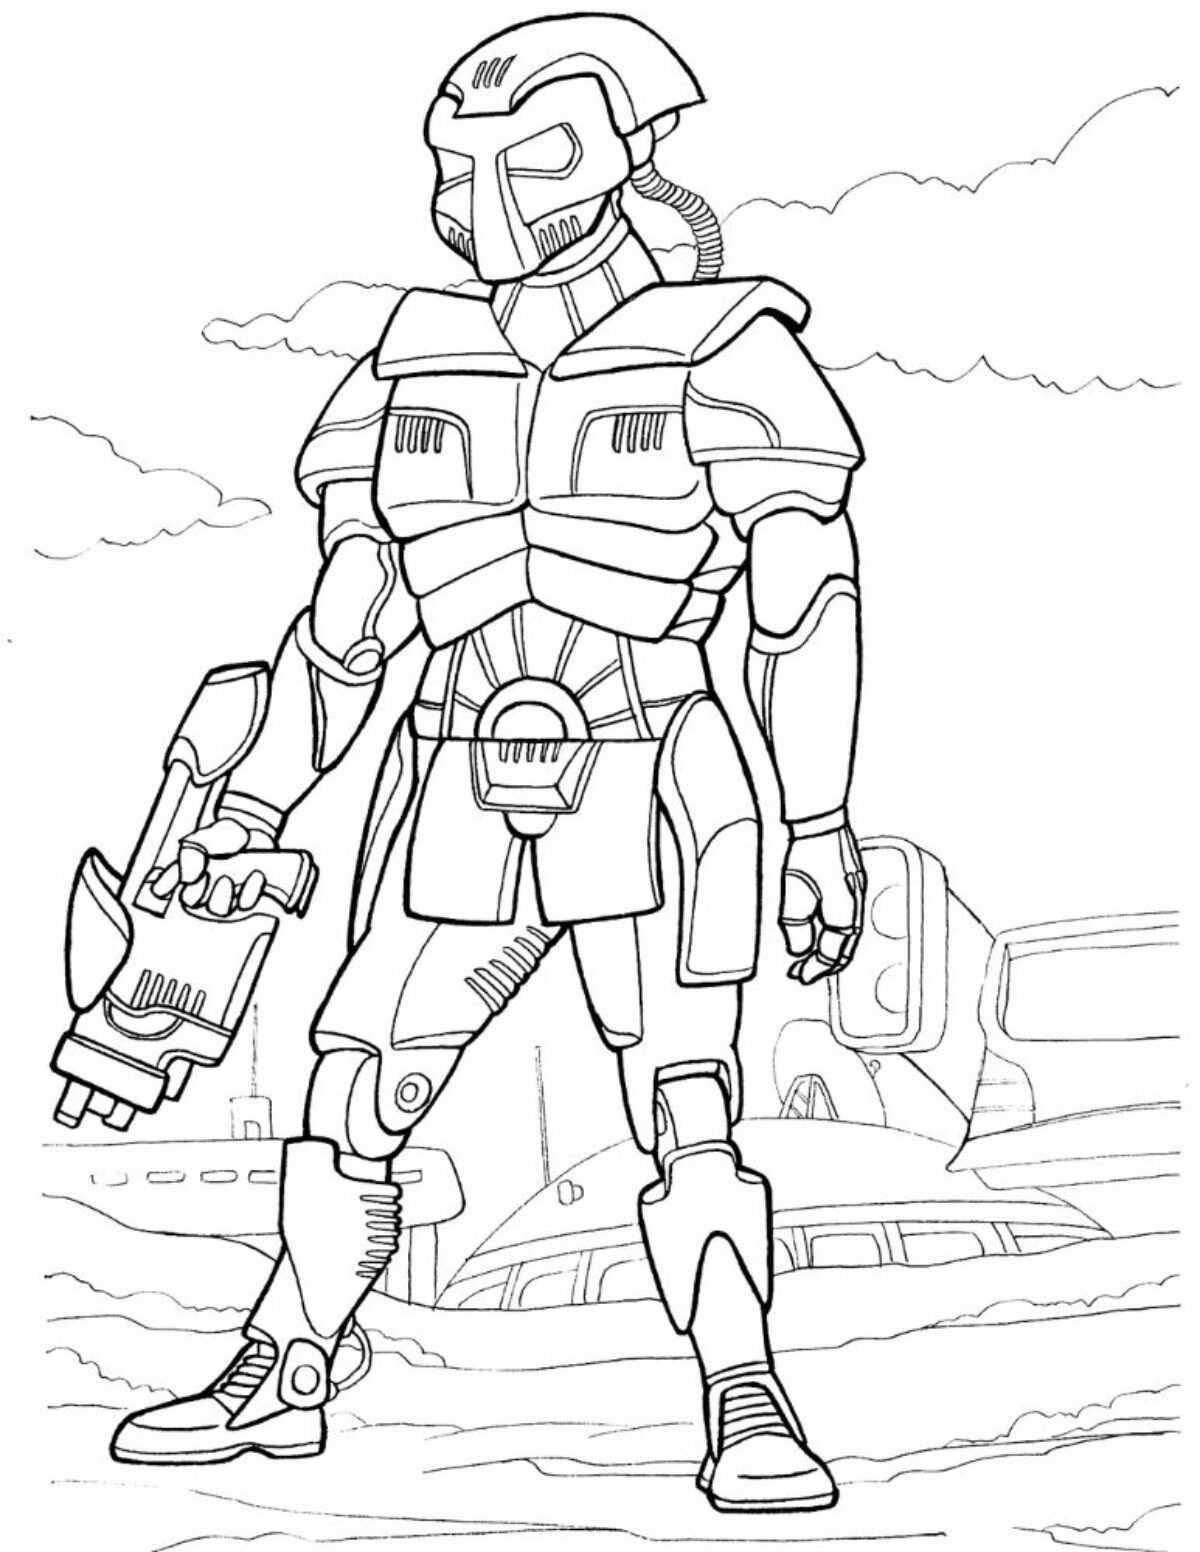 Printable robot coloring pages for kids put that robot in color